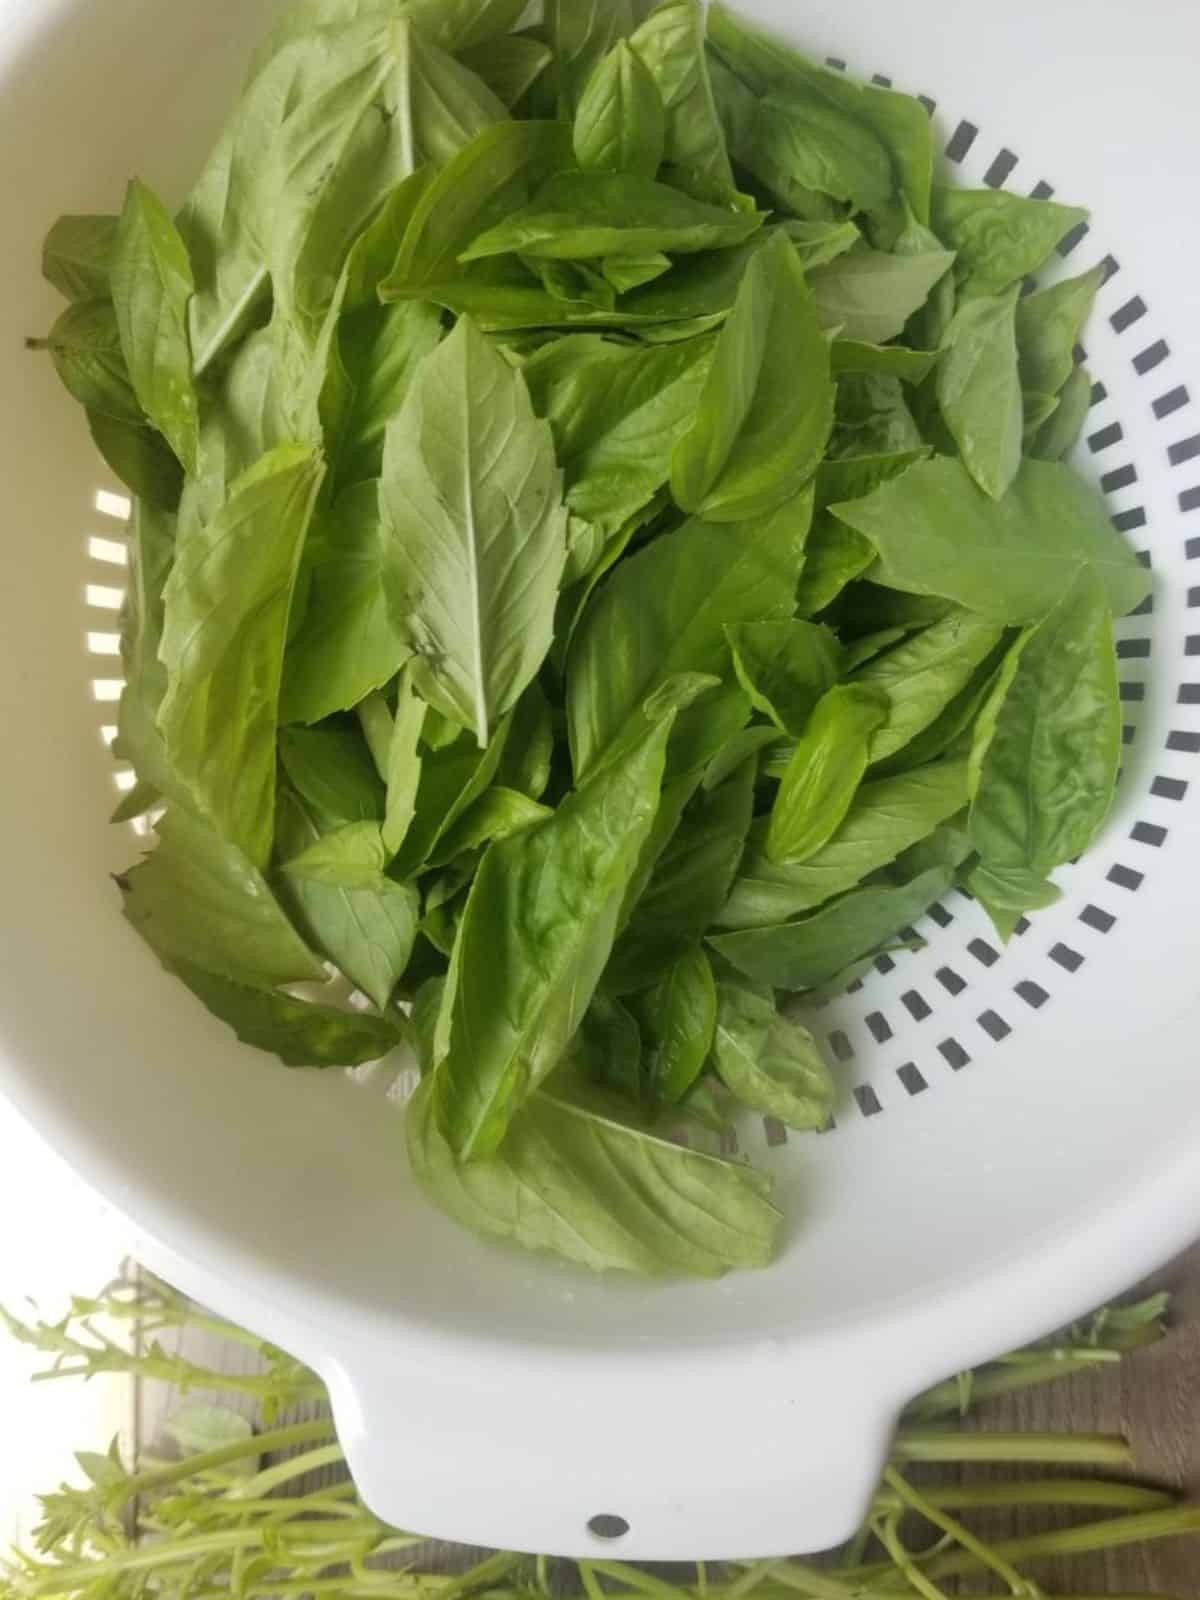 plucked basil leaves from stems in a plastic coriander.